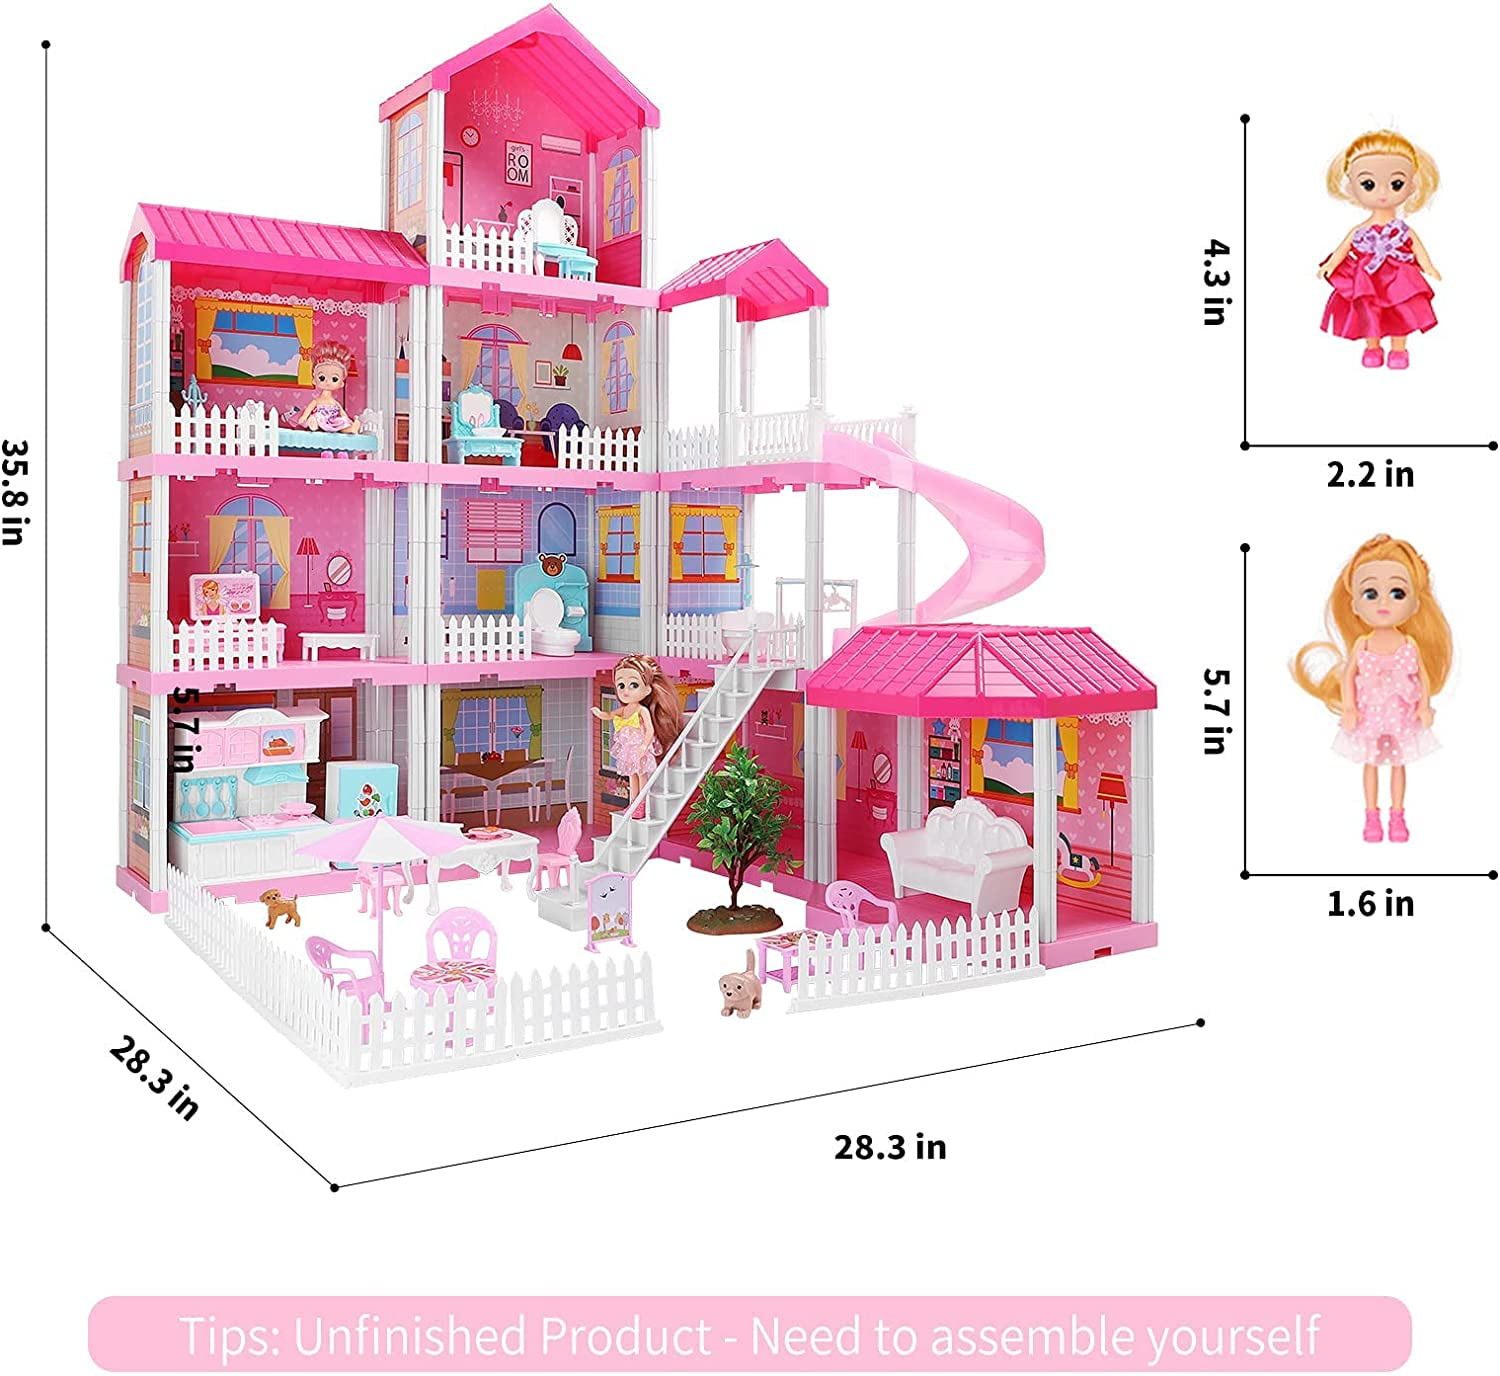  Doll House, Dream House with 11.5 Inch Dolls, 2-Story Dollhouse  w/Plastic Walls, Lights, Stairs, Large Furnitures & Accessories, Playhouse  Dreamhouse Gift for 3 to 12 Year Olds Girls Kids : Toys